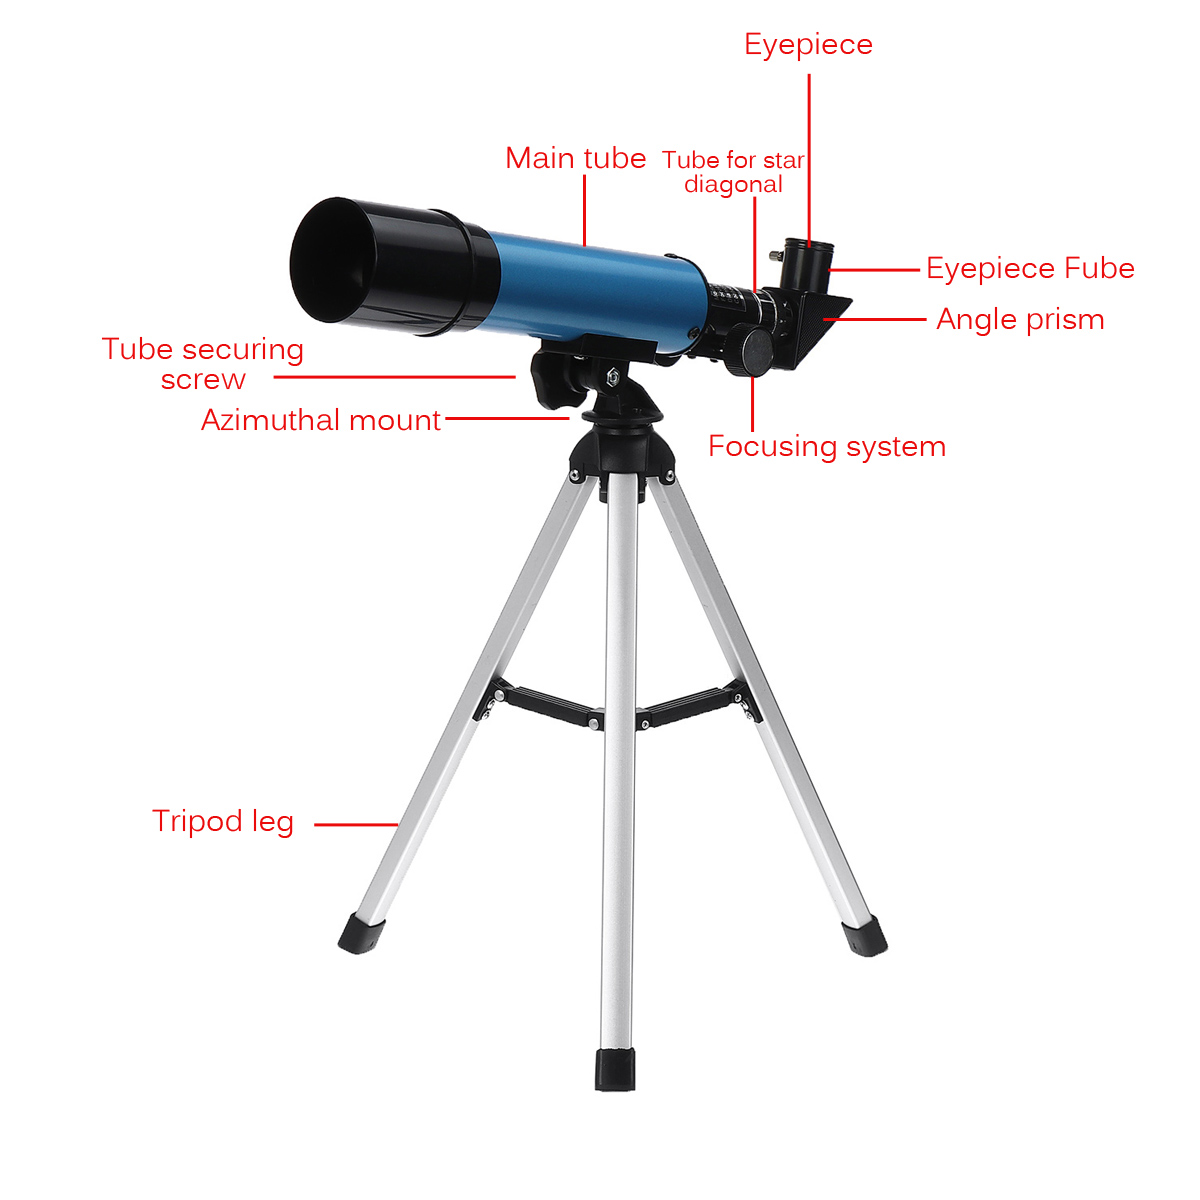 90x-Magnification-Astronomical-Telescope-Clear-Image-with-Remote-Control-and-Camera-Rod-for-Observe--1851121-2